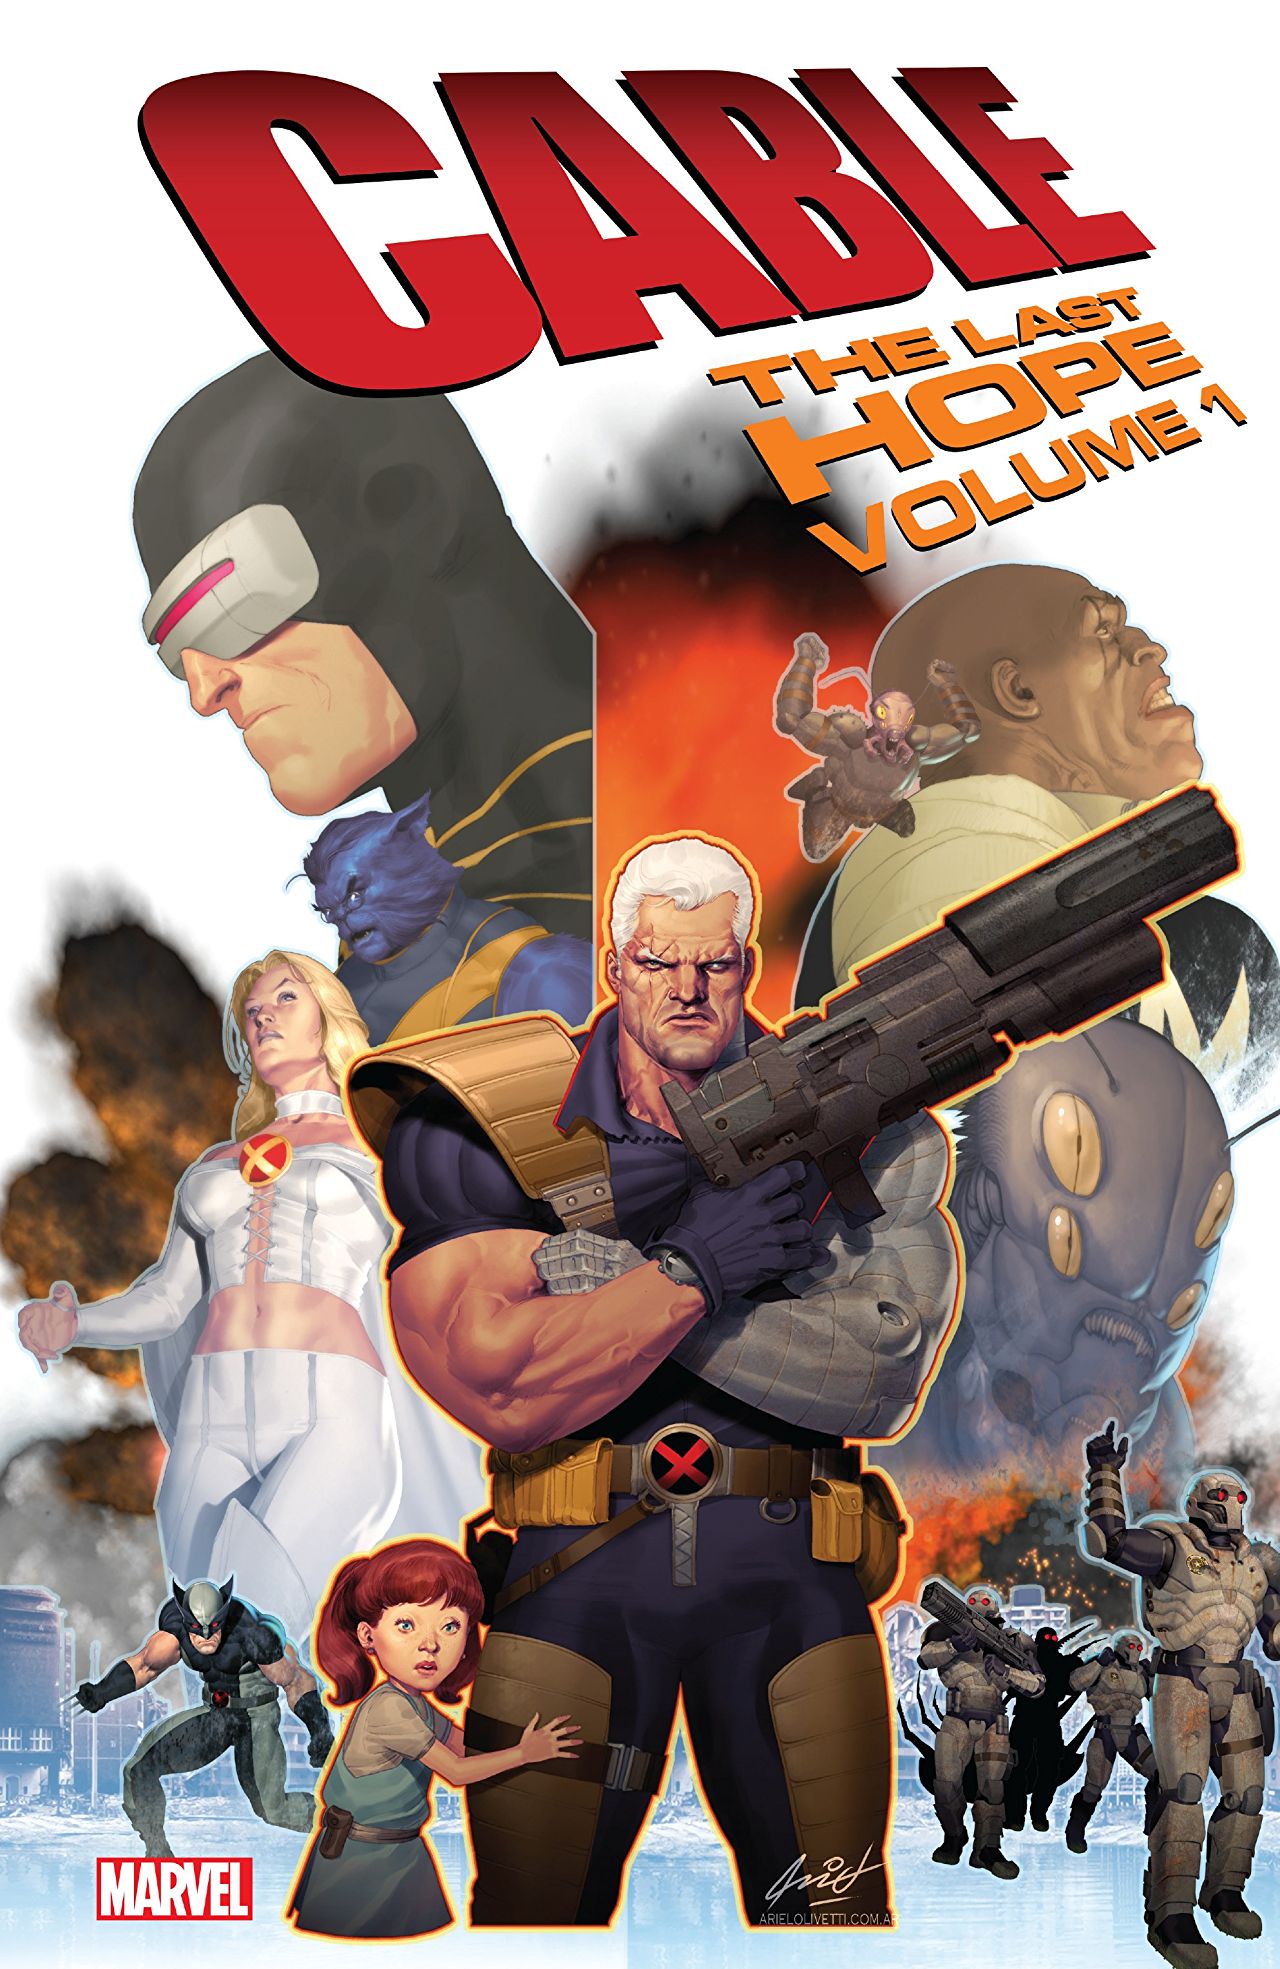 Cable: The Last Hope Vol. One Review: Required reading